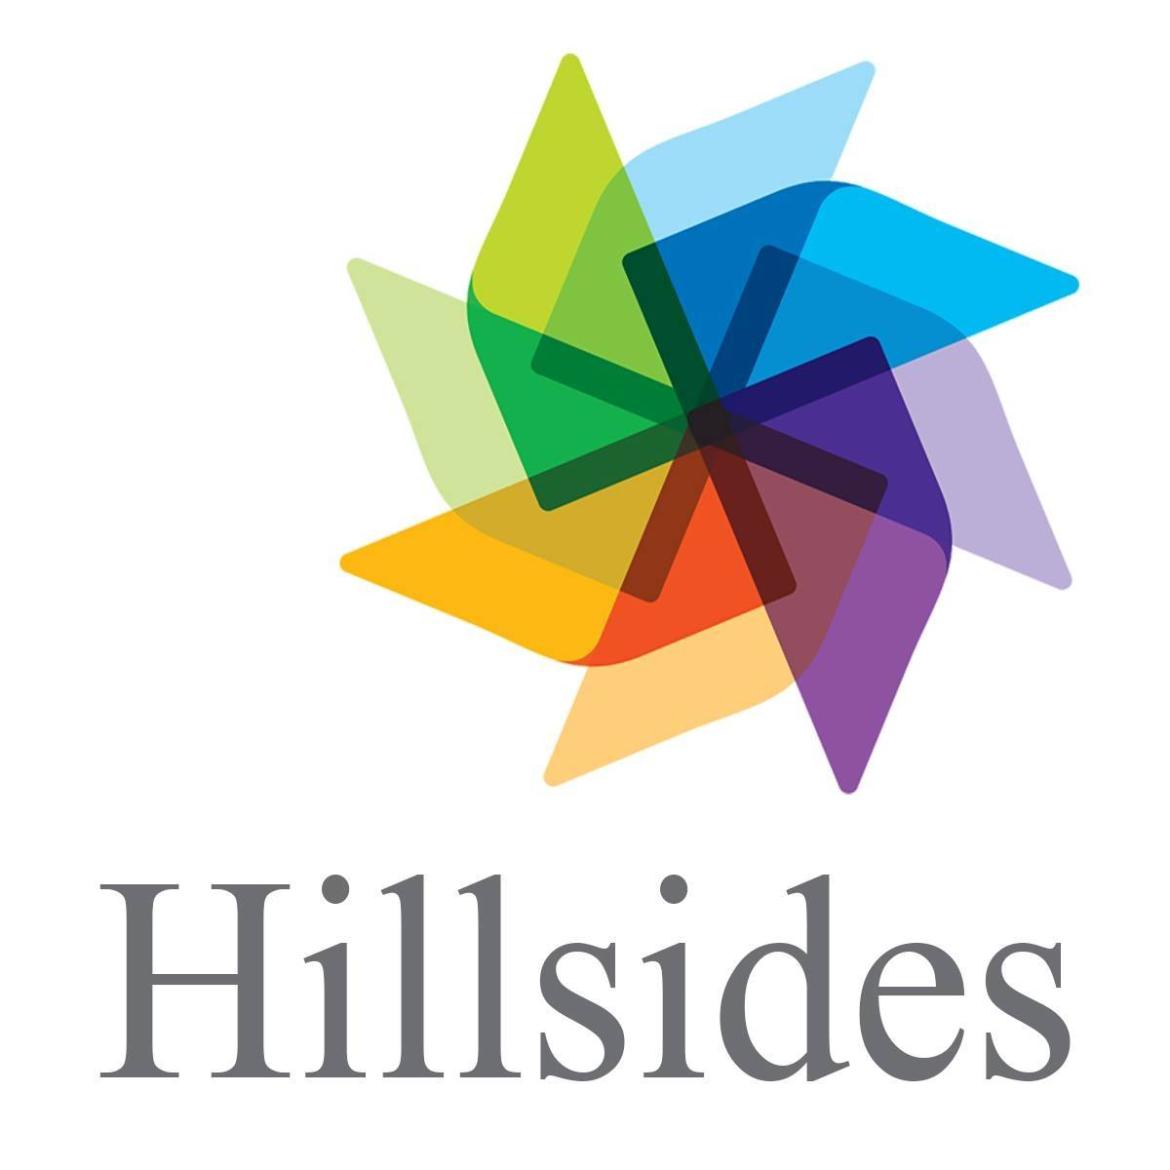 This is a logo of Hillsides, a non-profit organization.